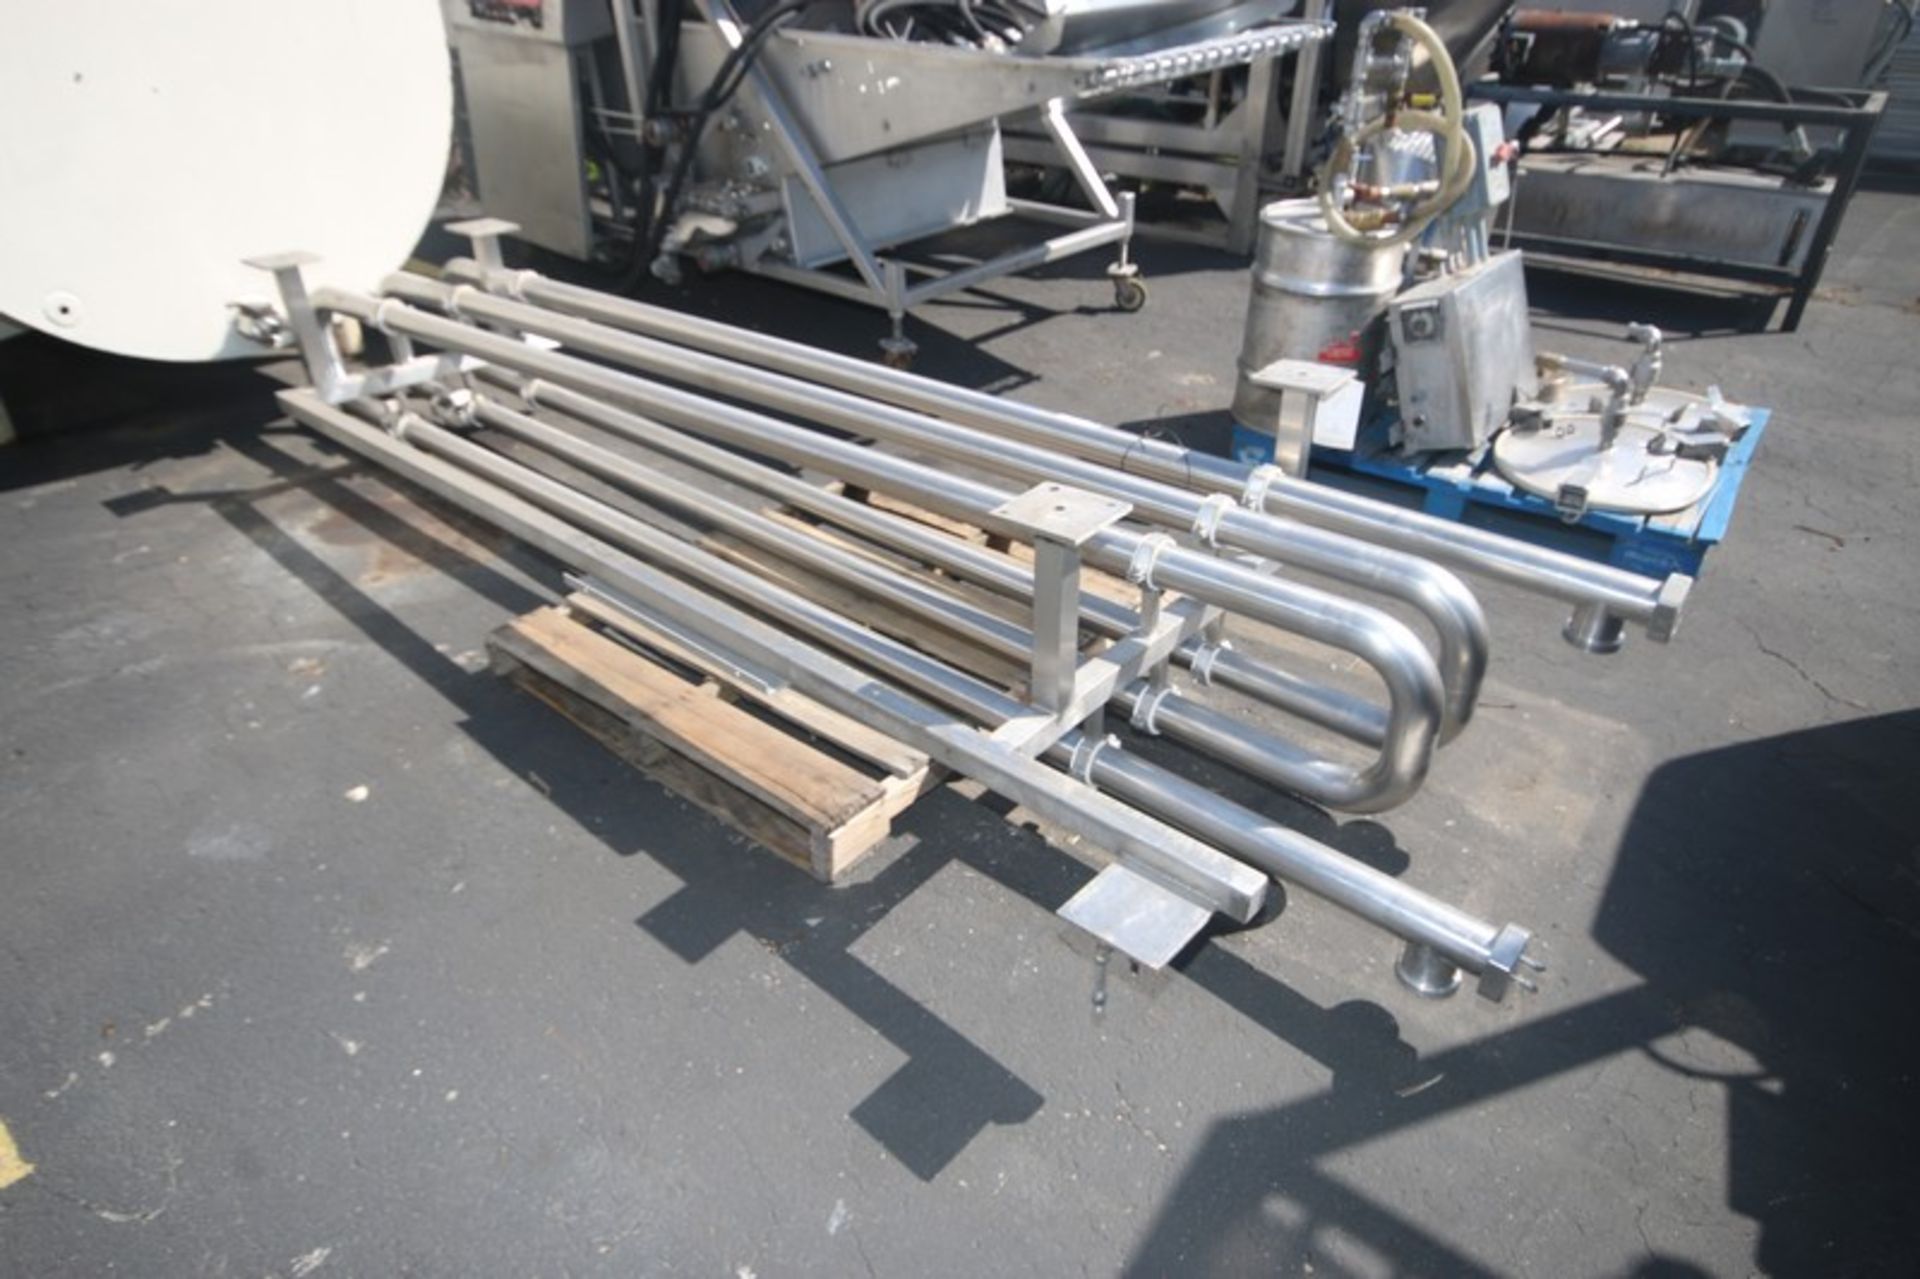 3-Pass 3" S/S Holding Tube, Aprox. 11' L, Mounted on S/S Frame (INv#69014)(LOCATED AT MDG AUCTION - Image 3 of 4